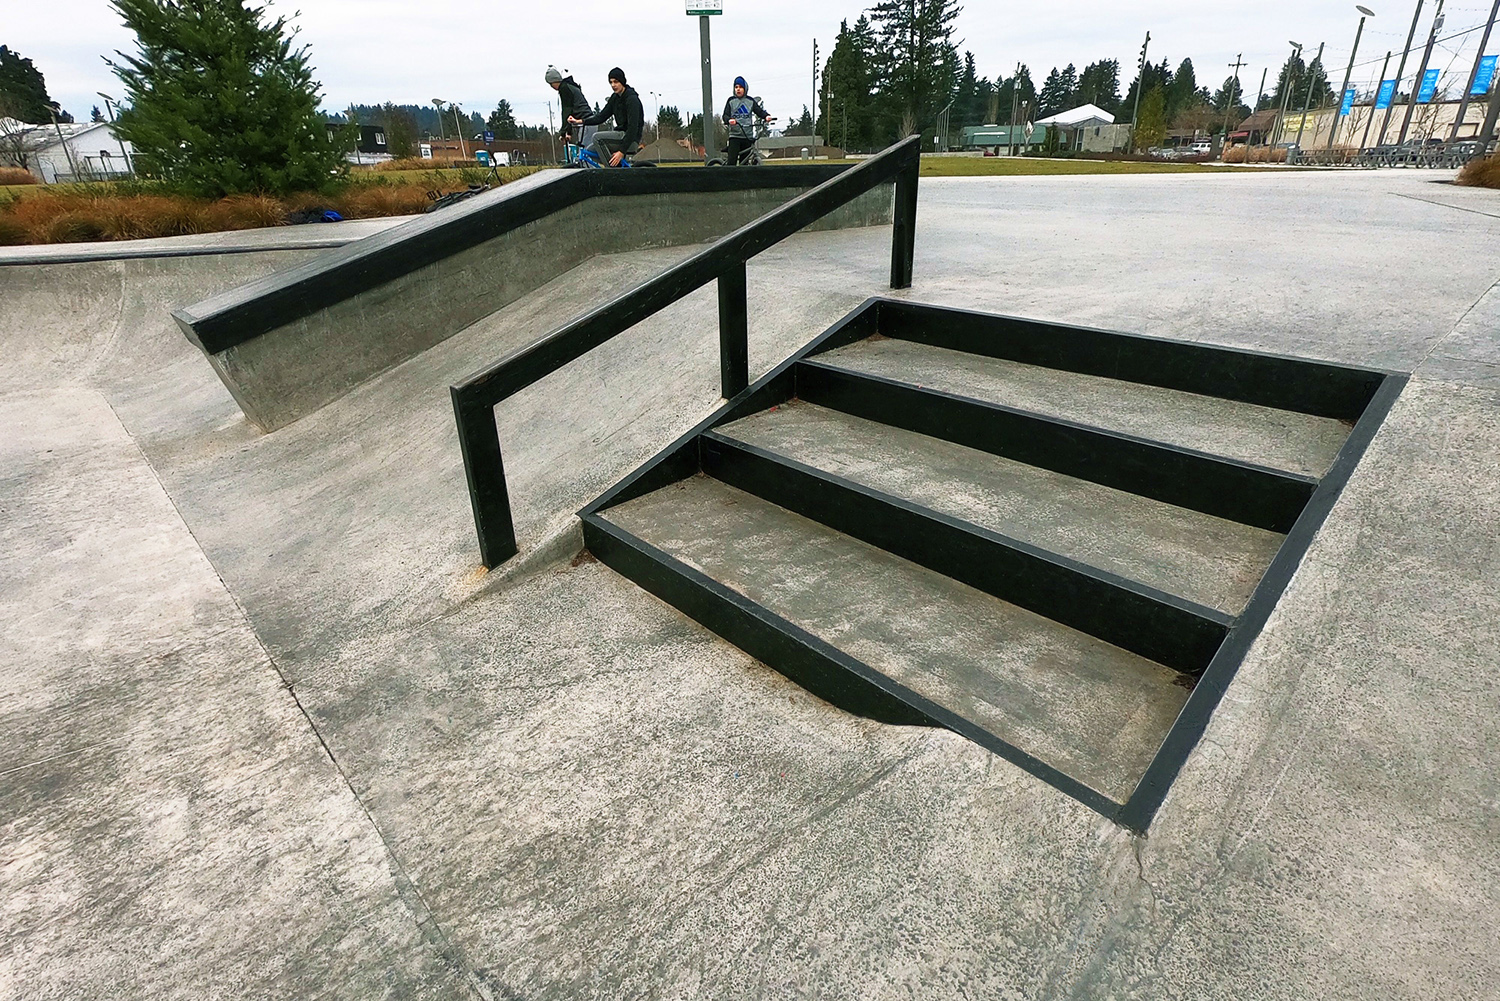  Steps, rail and ledge features at the Gateway Skate Spot 